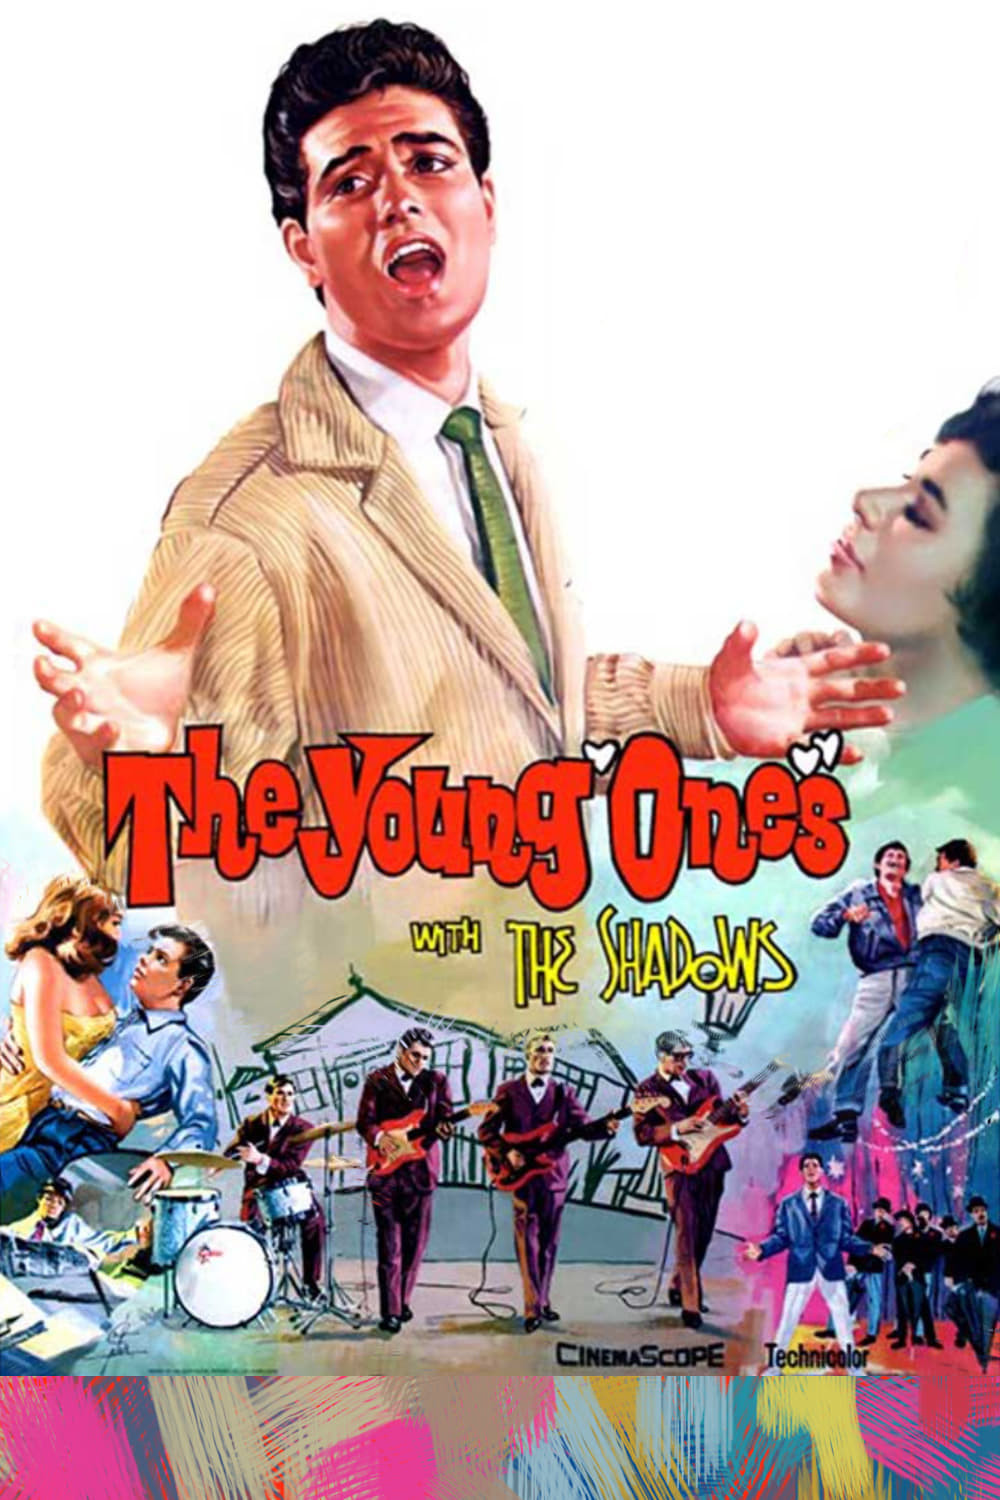 The young ones 1961 Cliff Richard